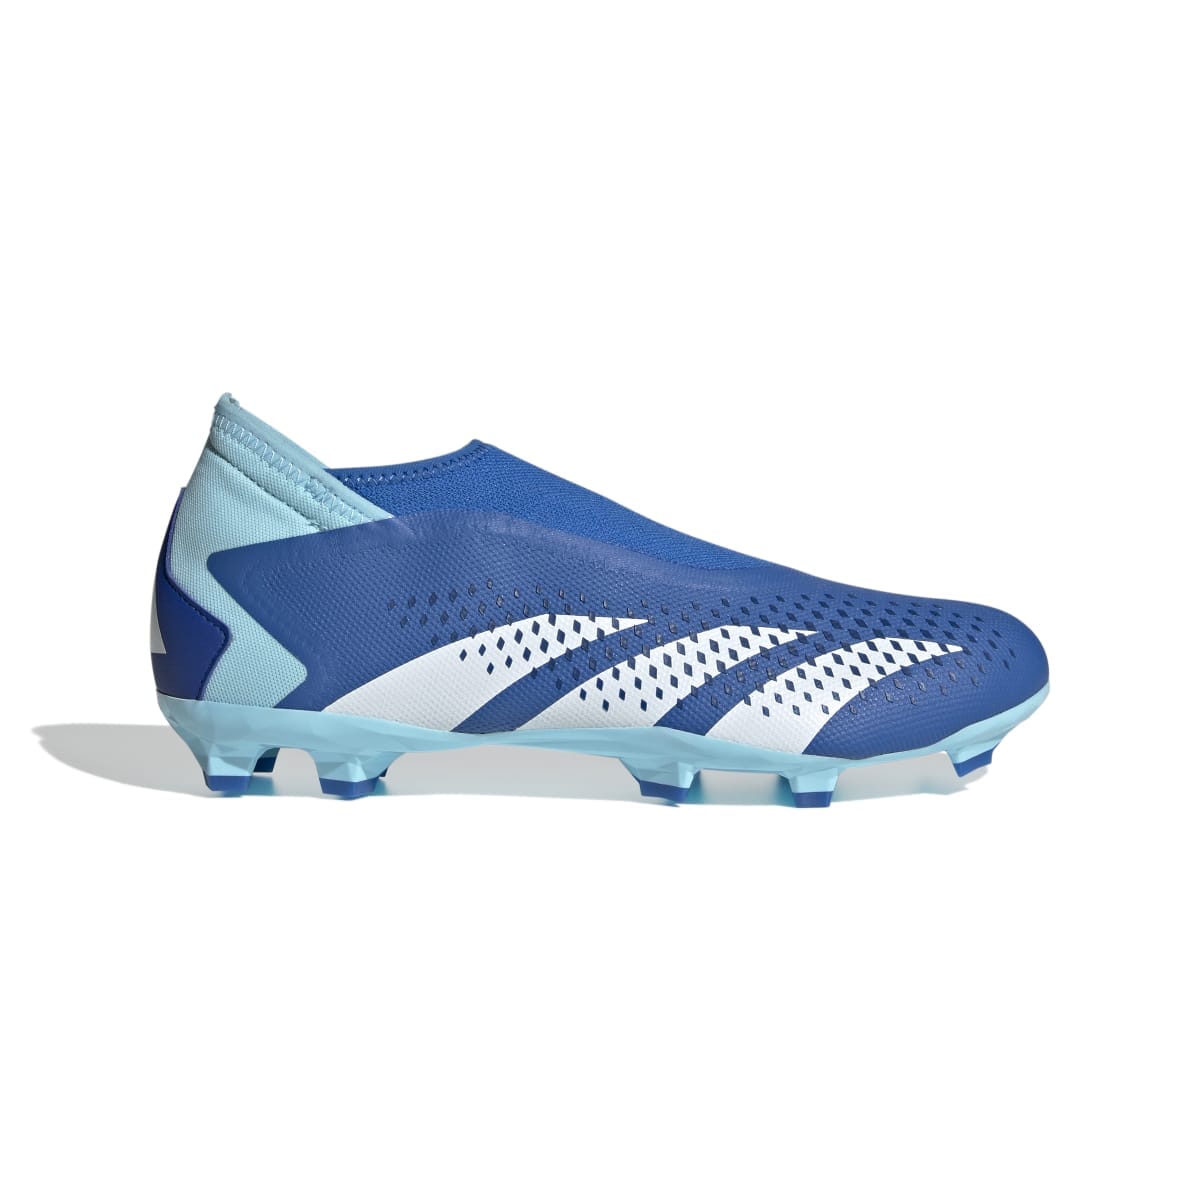 adidas Unisex Predator Accuracy.3 Laceless Firm Ground Soccer Shoes | GZ0019 Soccer Shoes Adidas 7.5 Bright Royal / Cloud White / Bliss Blue 